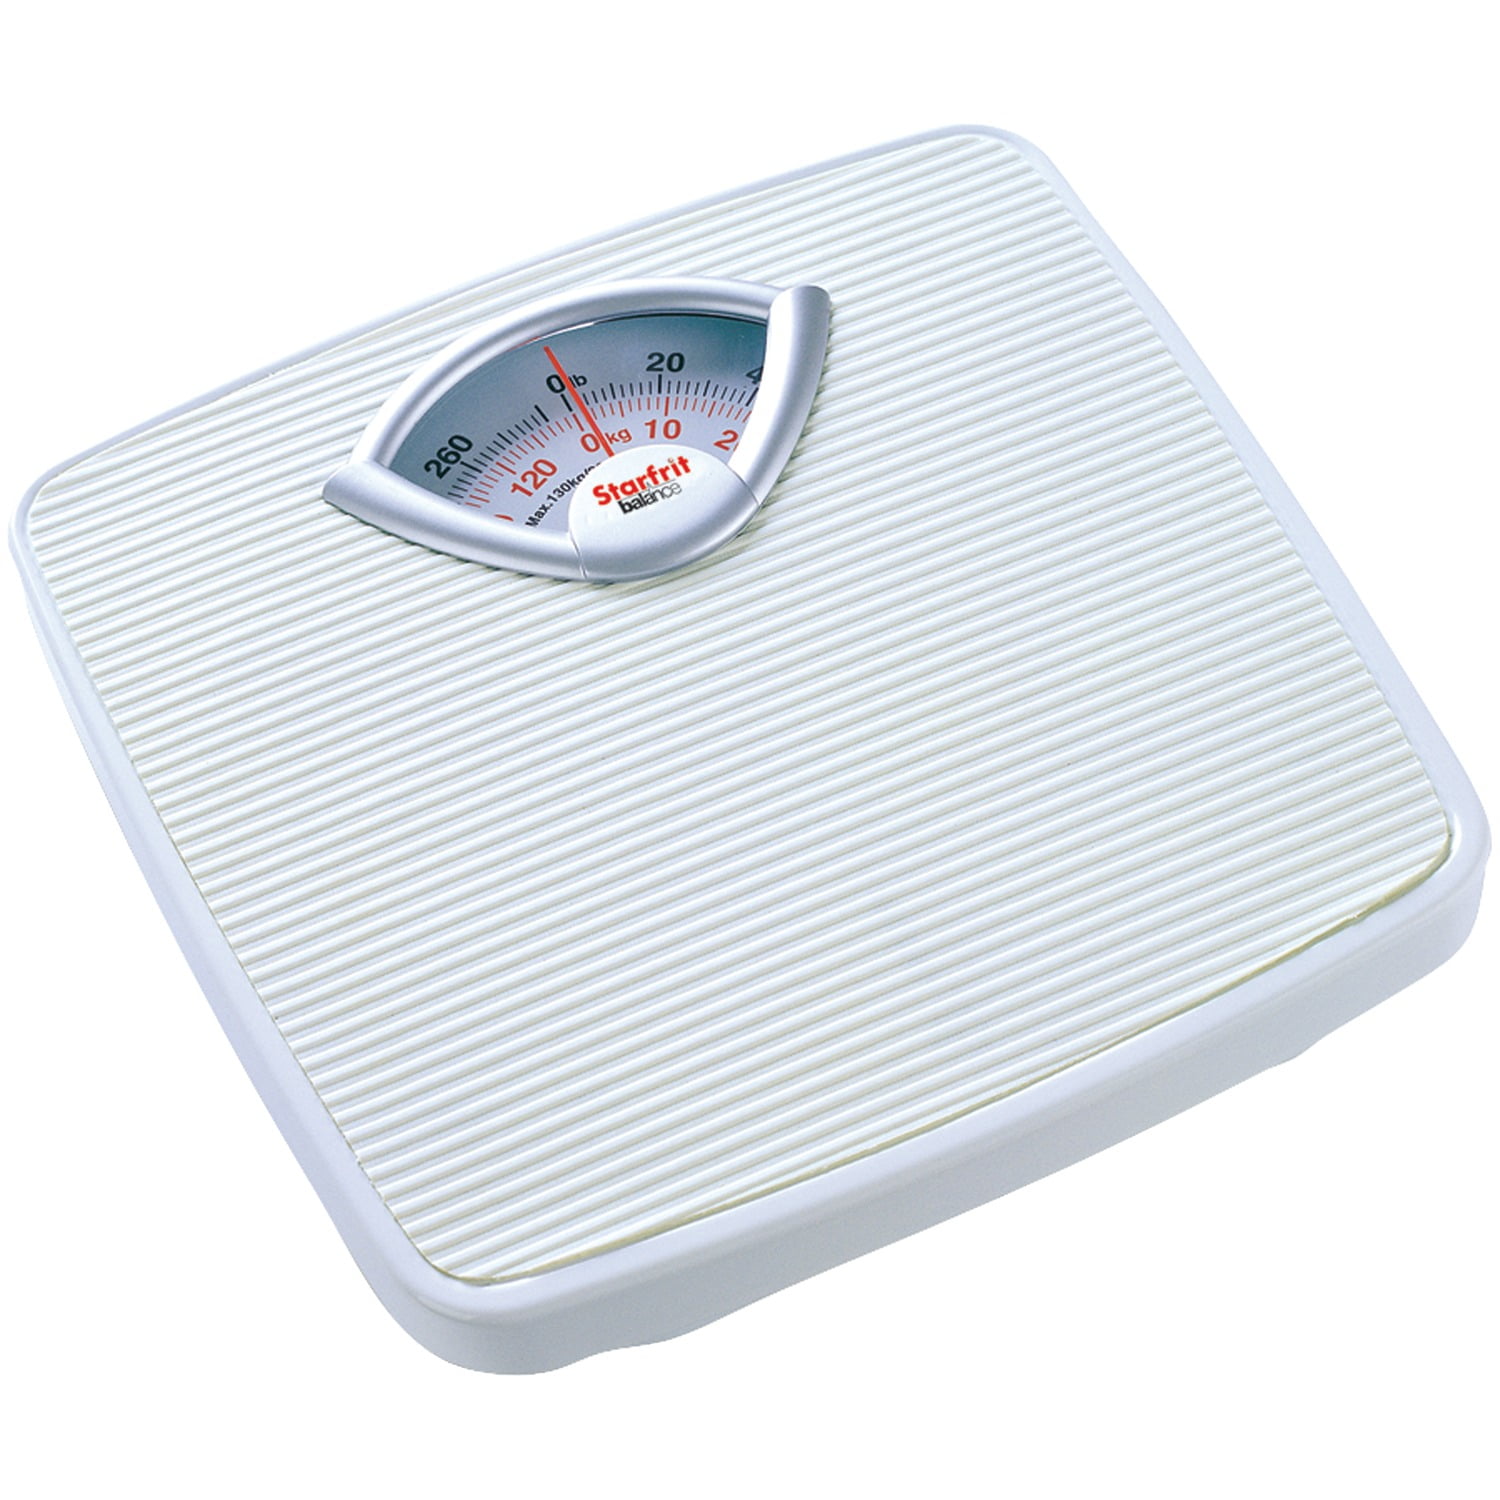 NEW Mainstays Dial Scale ~ Maximum Weight 300 lbs 